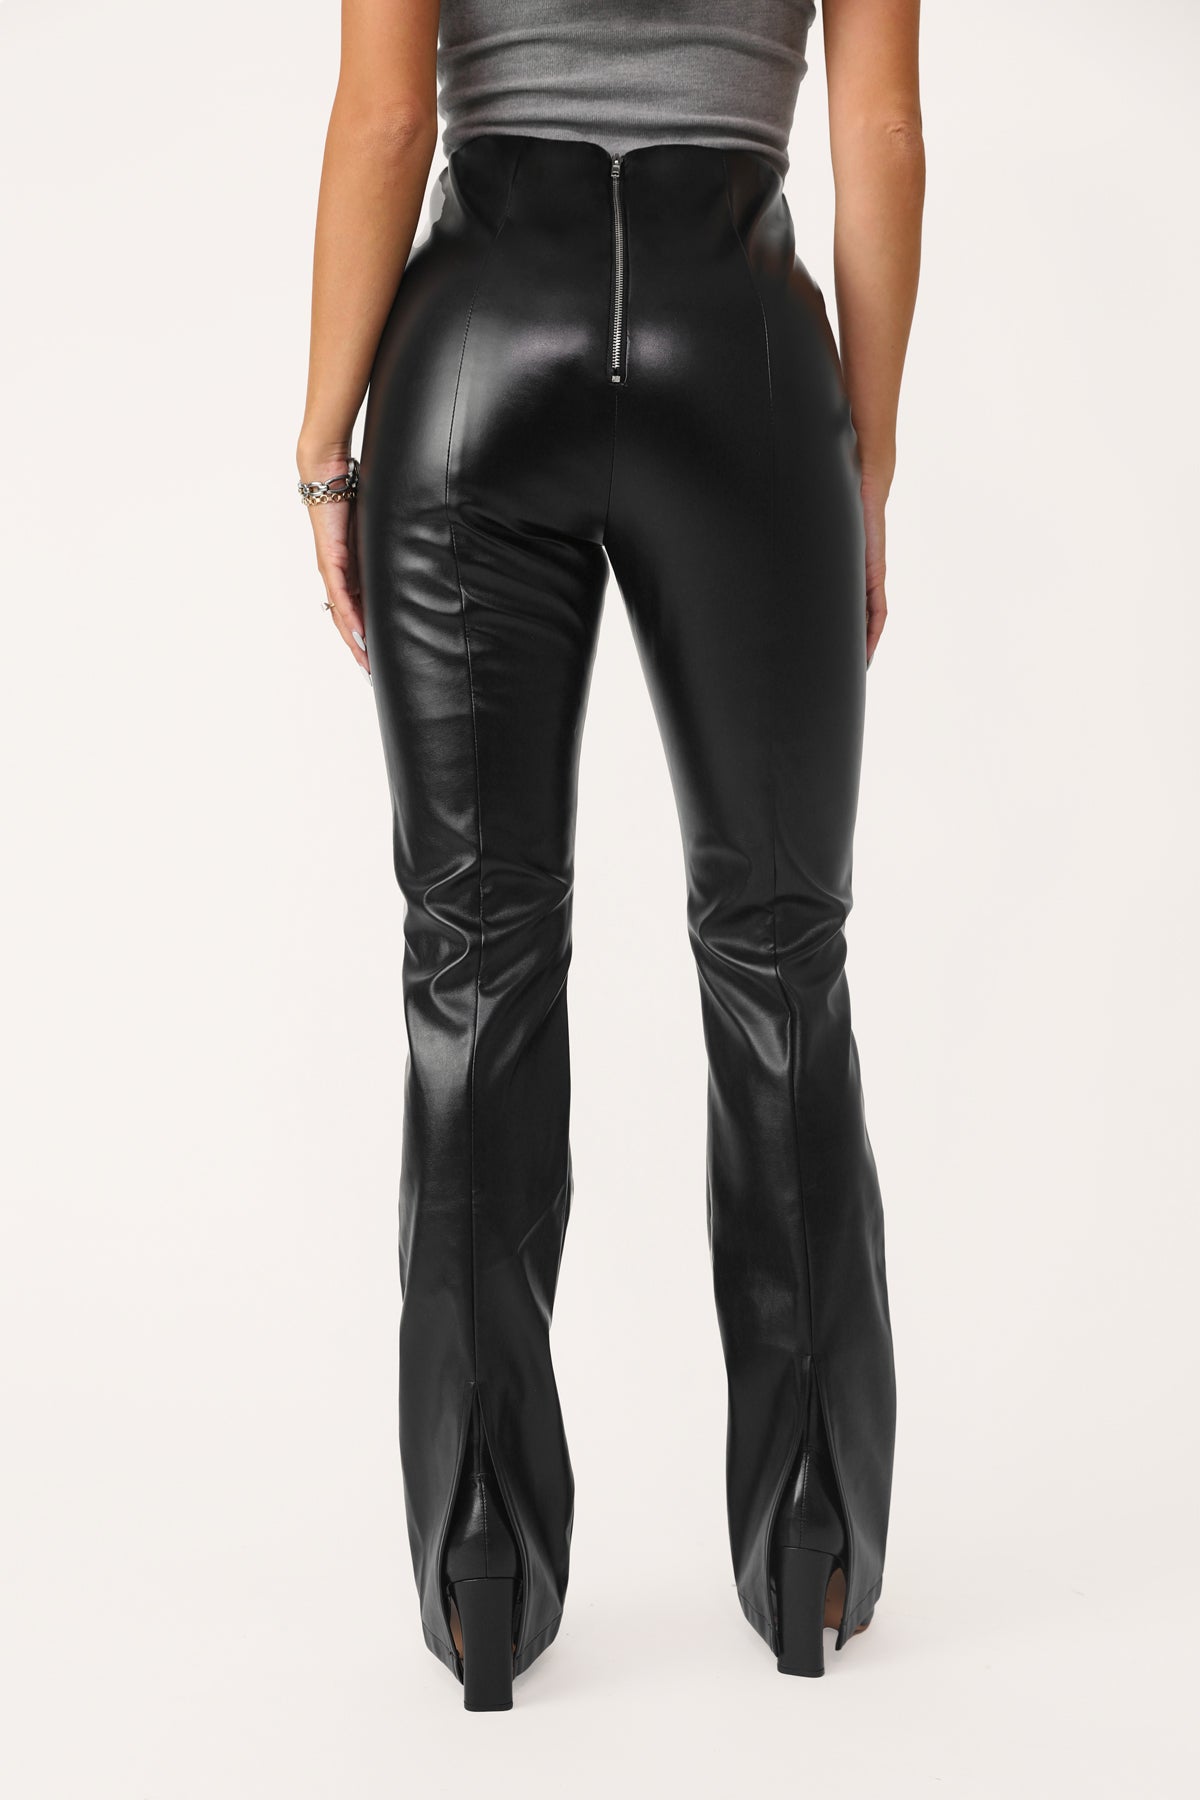 – Kittenish RIZZO LEATHER PANT FLARE FAUX BLACK